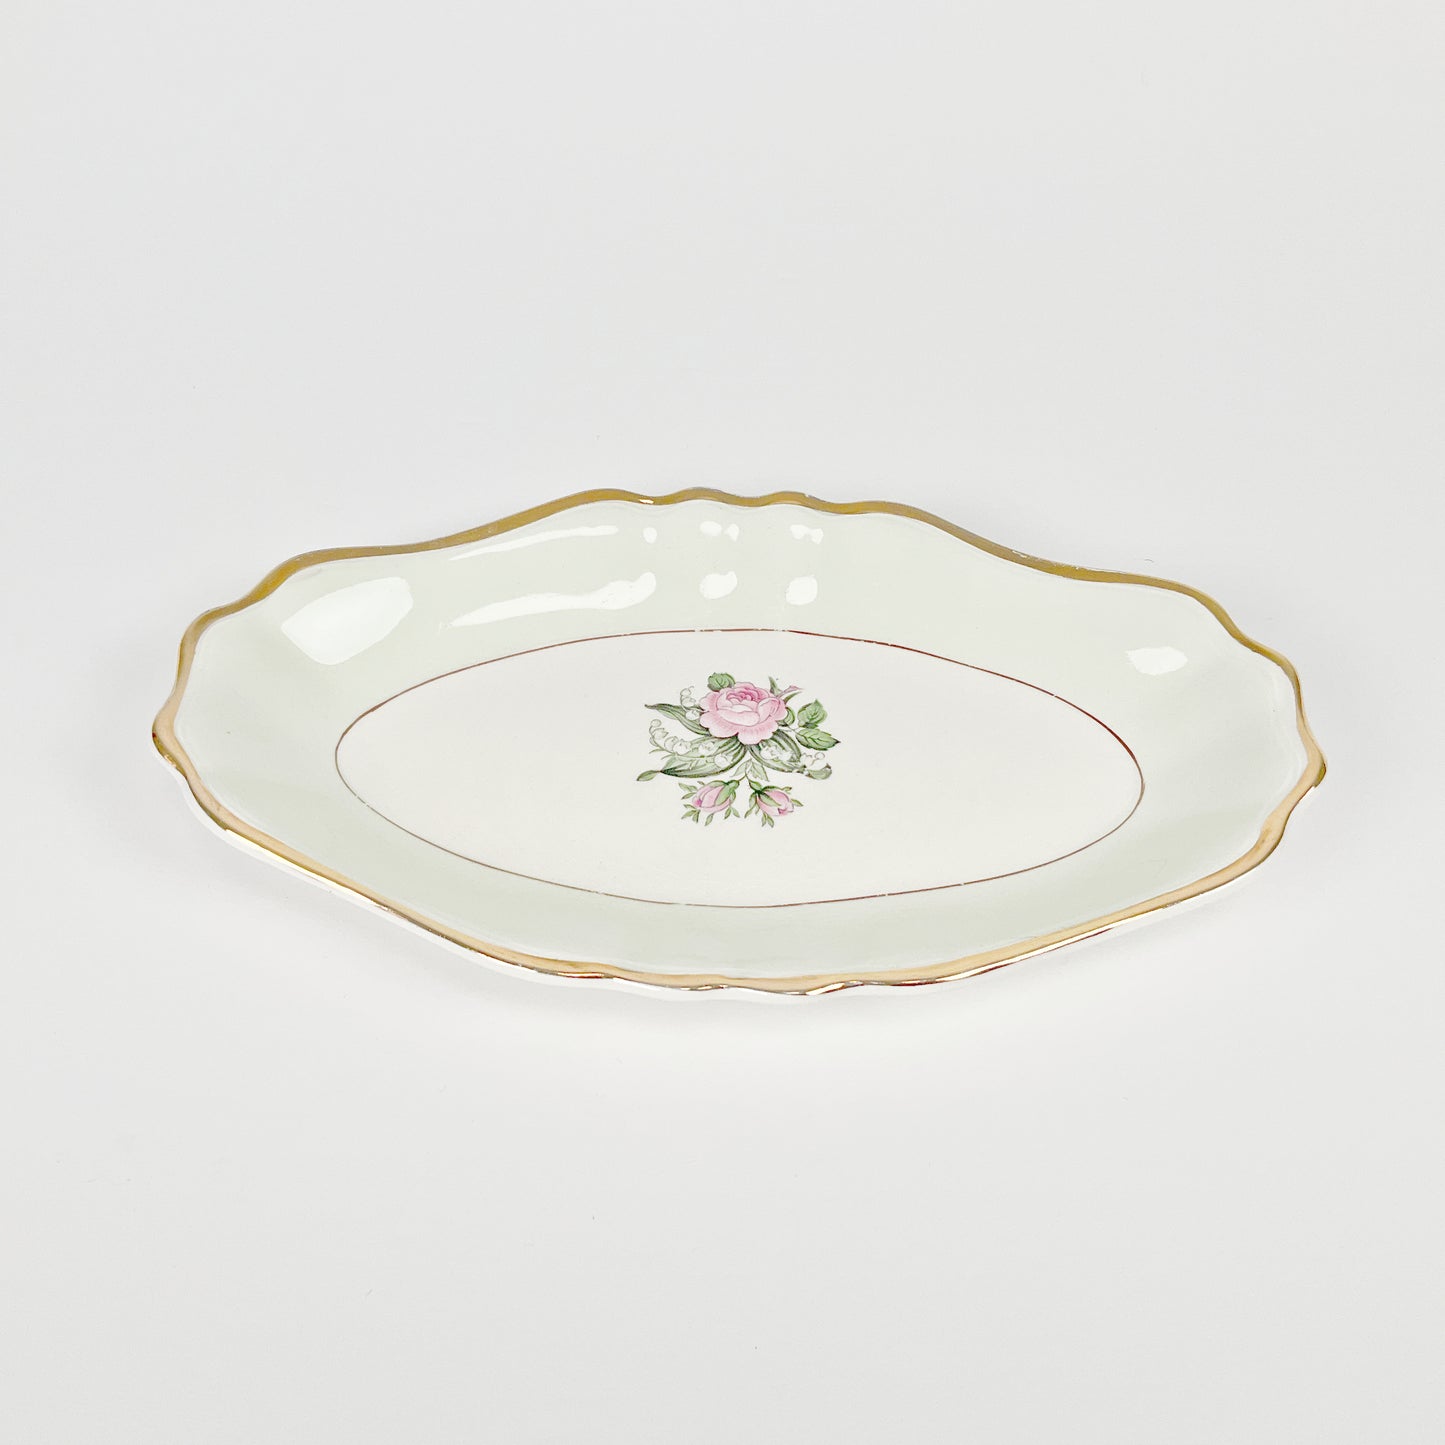 J & G Meakin - Floral Small Platter